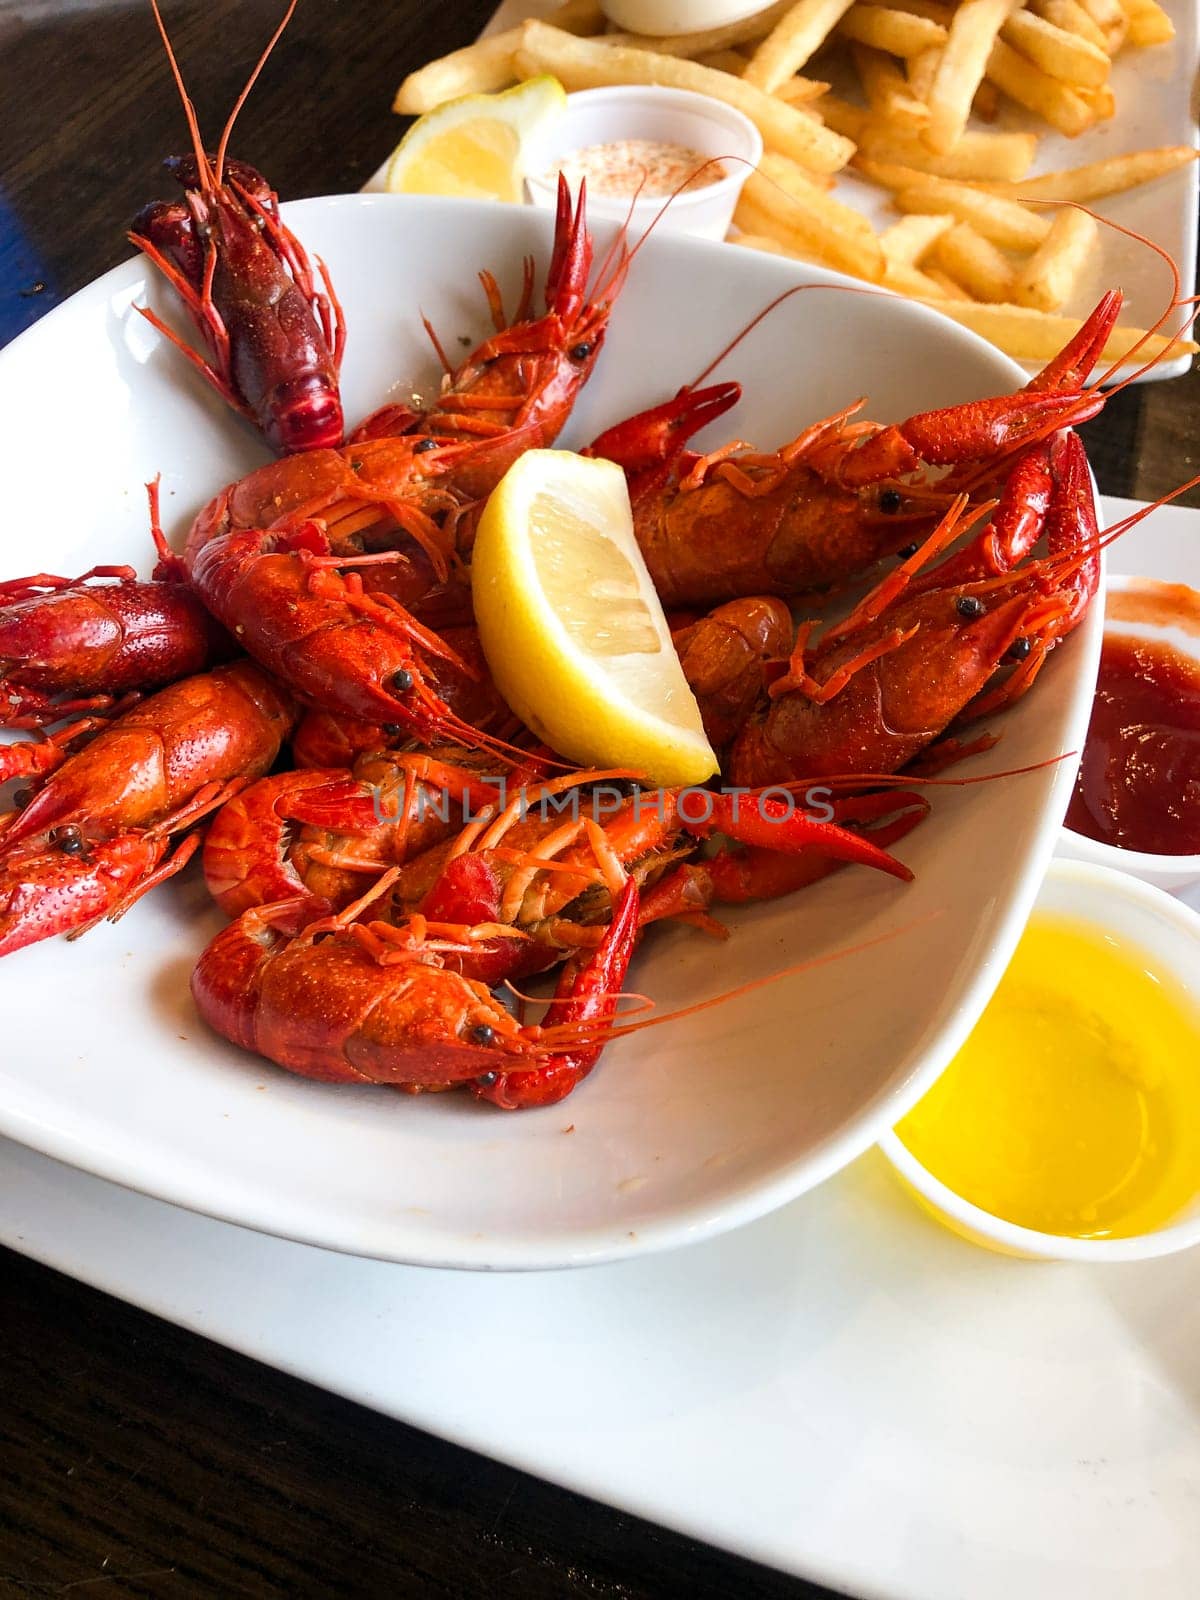 Crawfish or crayfish boil for dinner at a Southern restaurant in the United States. This freshwater seafood is a delicacy in some areas.